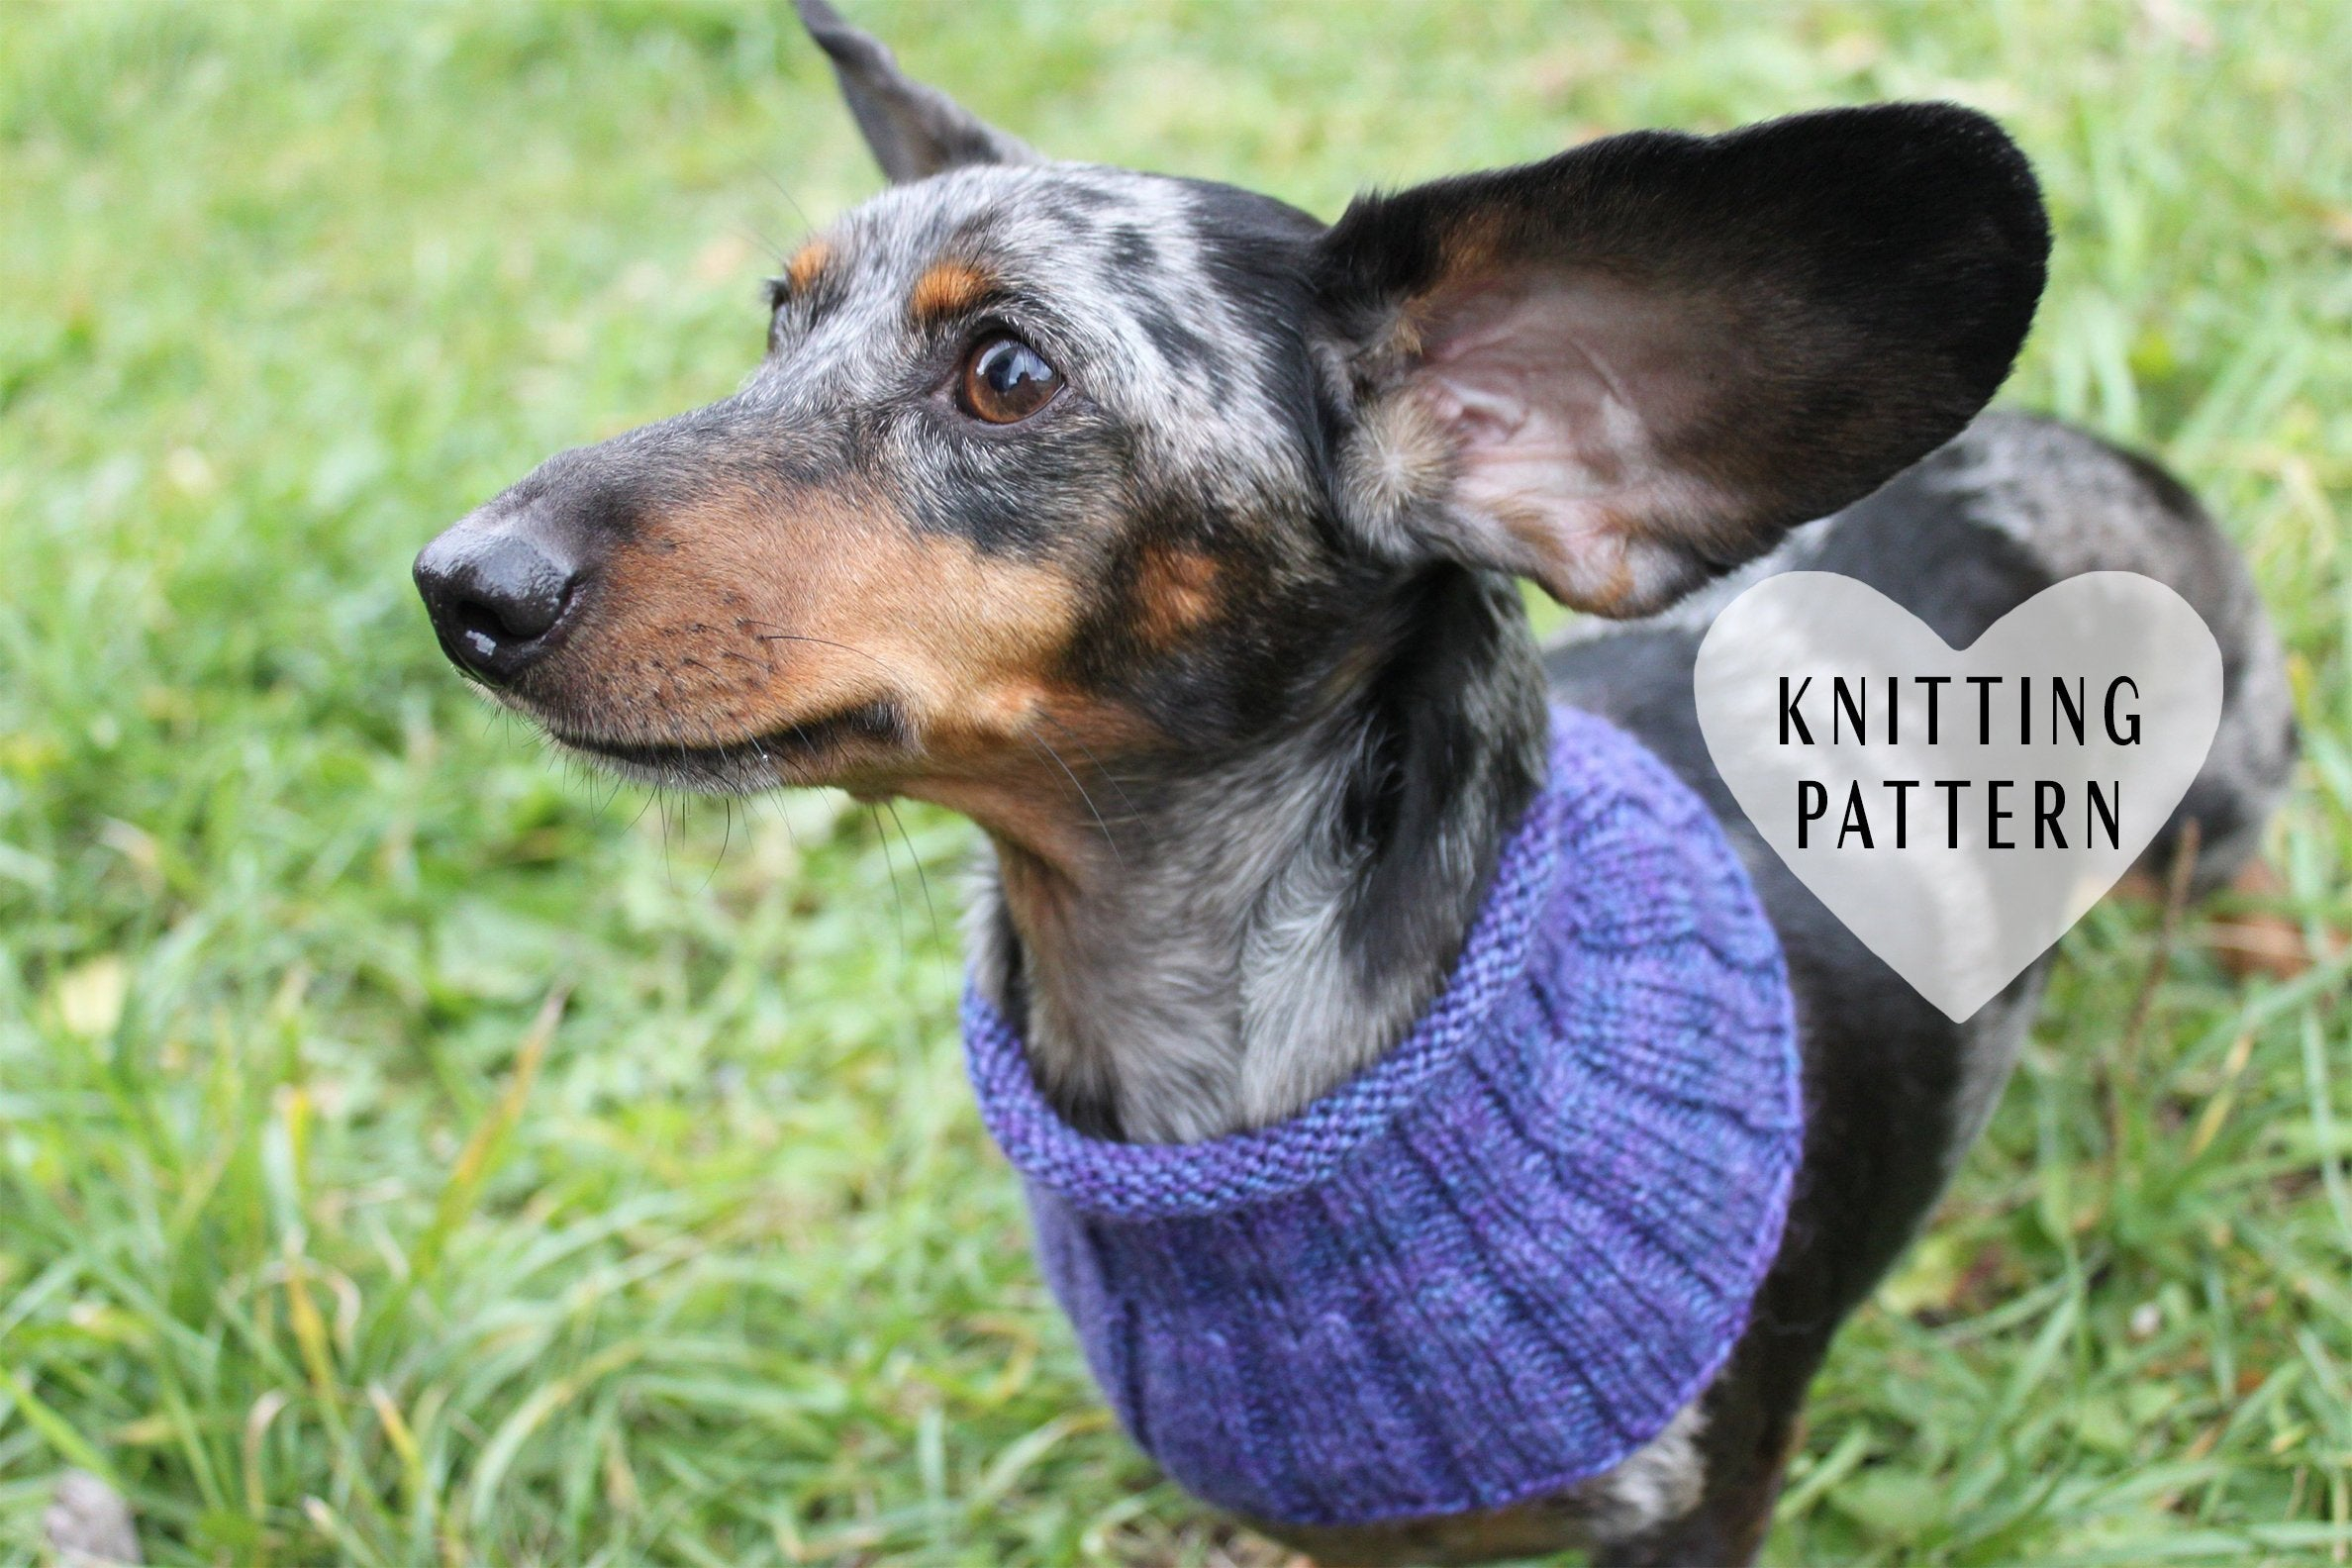 Dachshund Jumper Knitting Pattern Knitting Pattern Small Dog Cowl Neck Warmer Knitted Dog Cowl Dachshund Clothes Dog Clothes Miniatuer Dachshund Cowl Doxie Neck Warmer